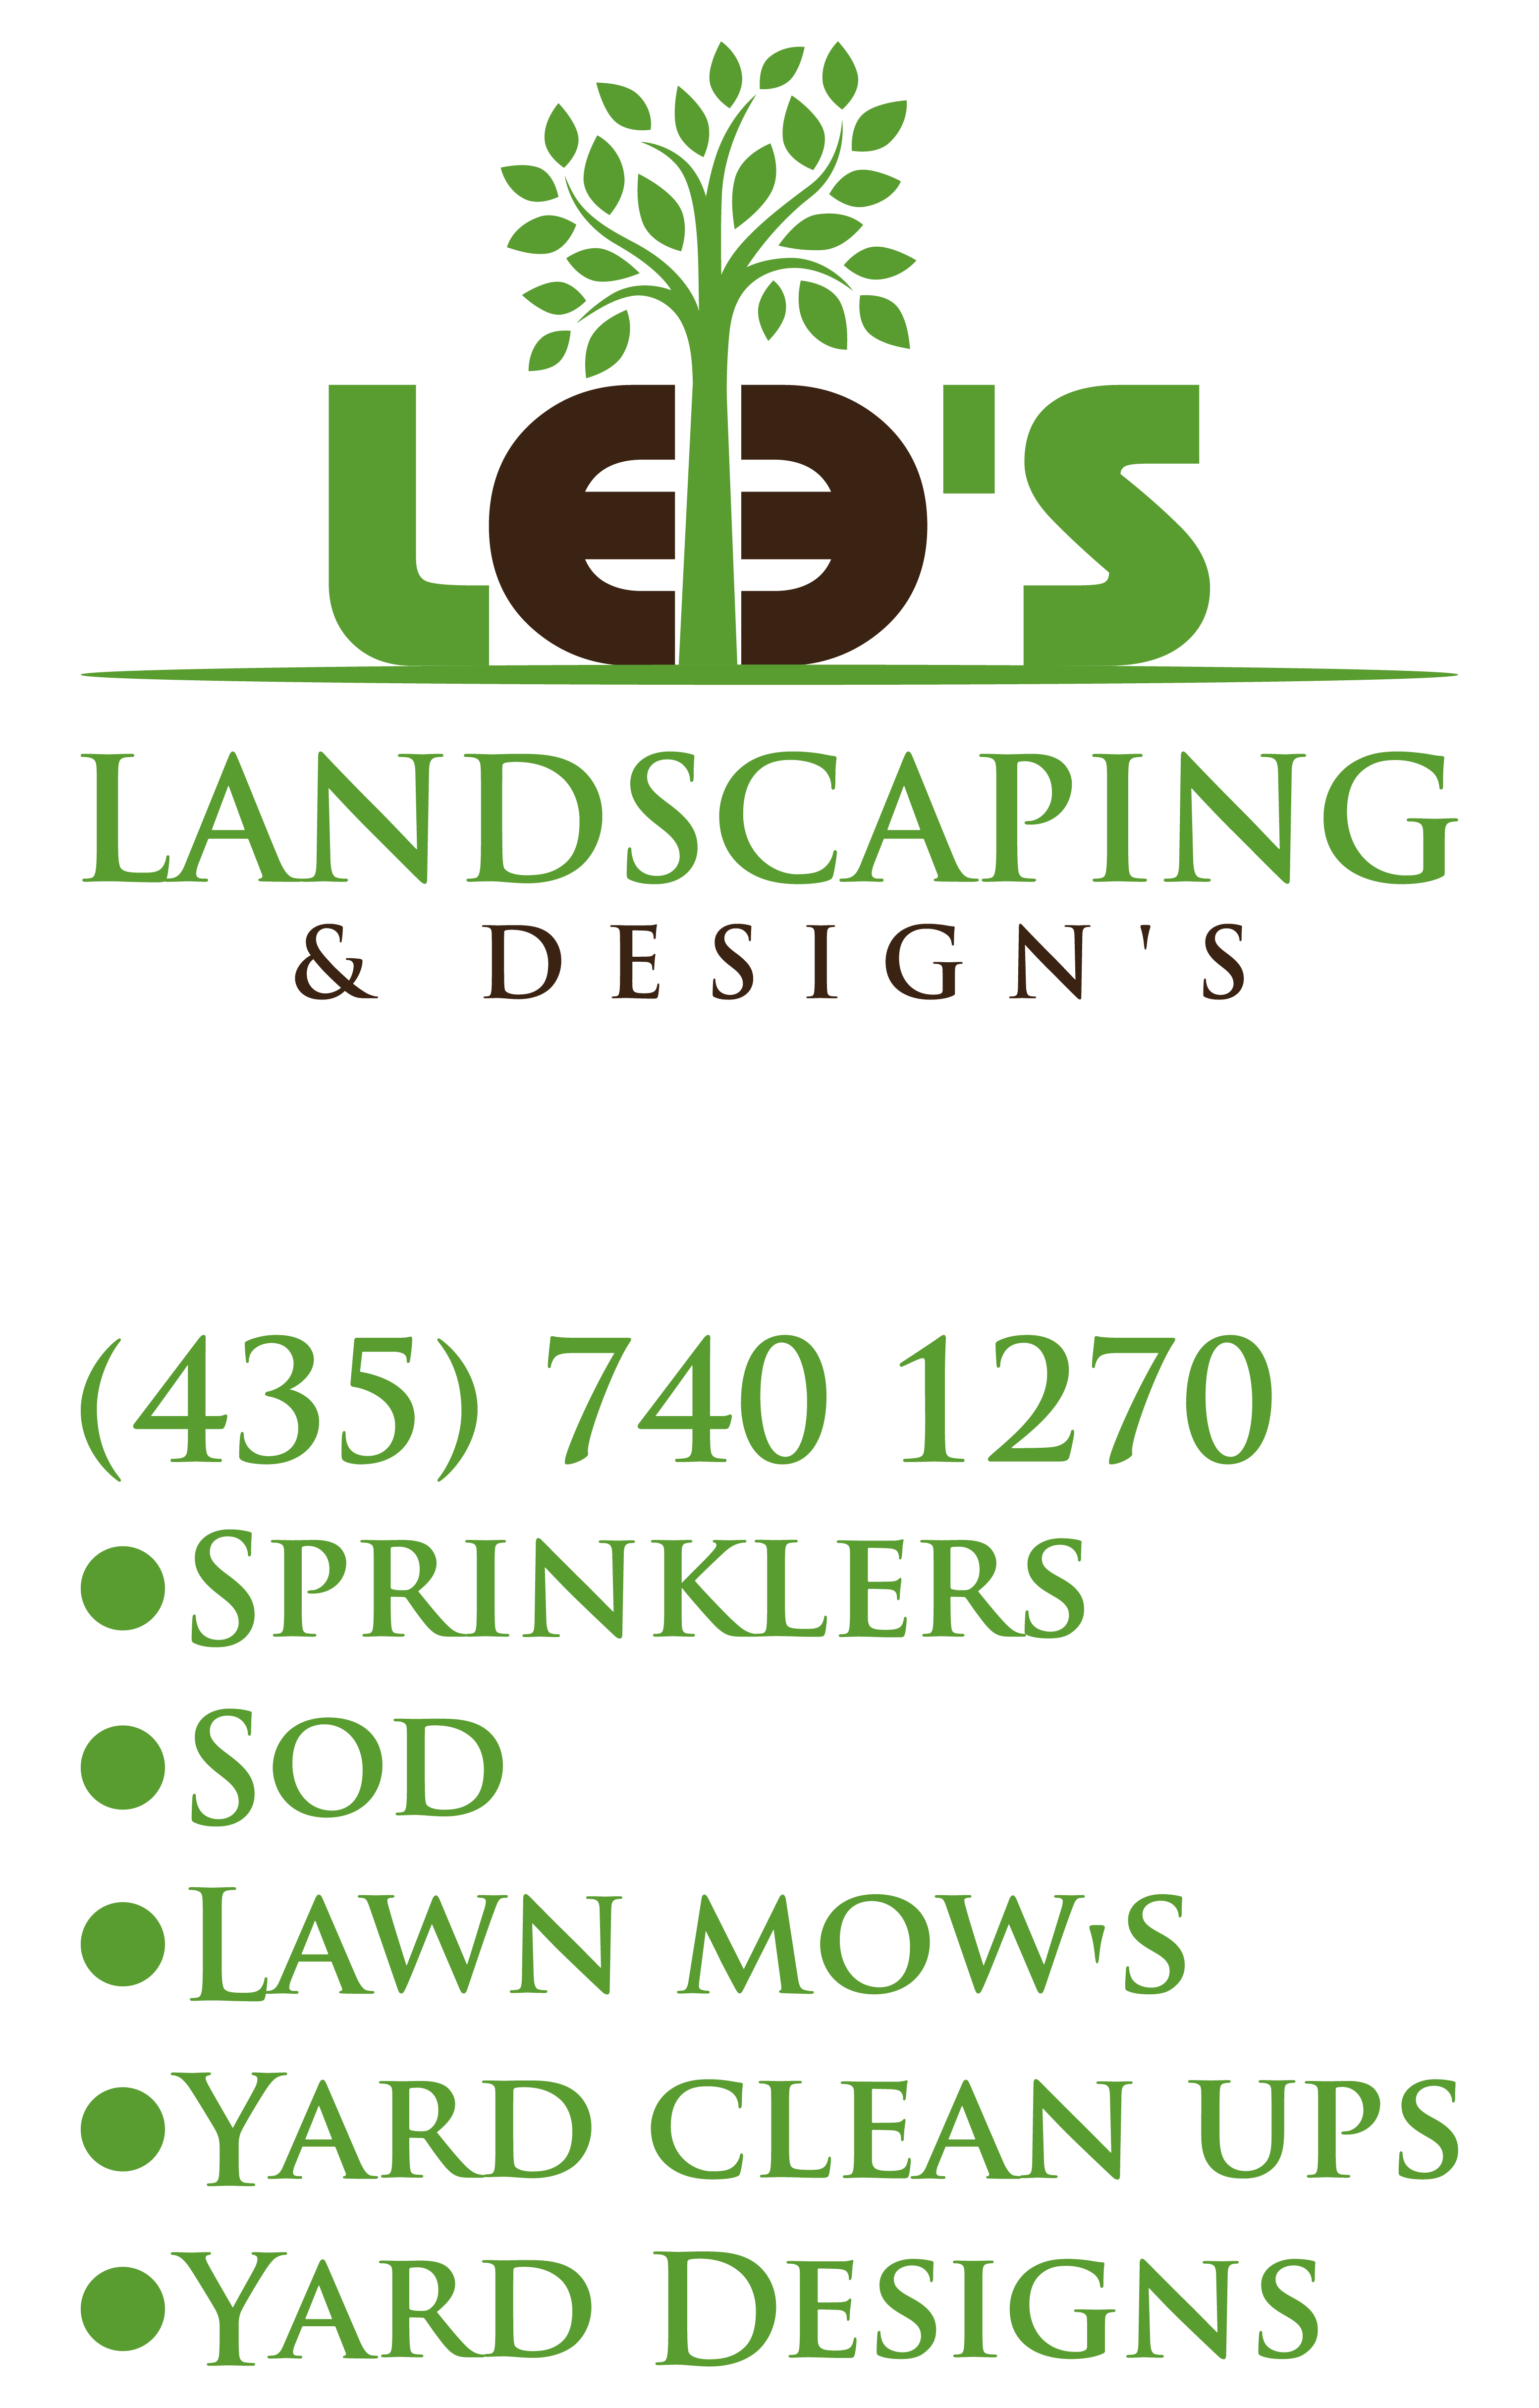 Lee Services and Design Logo